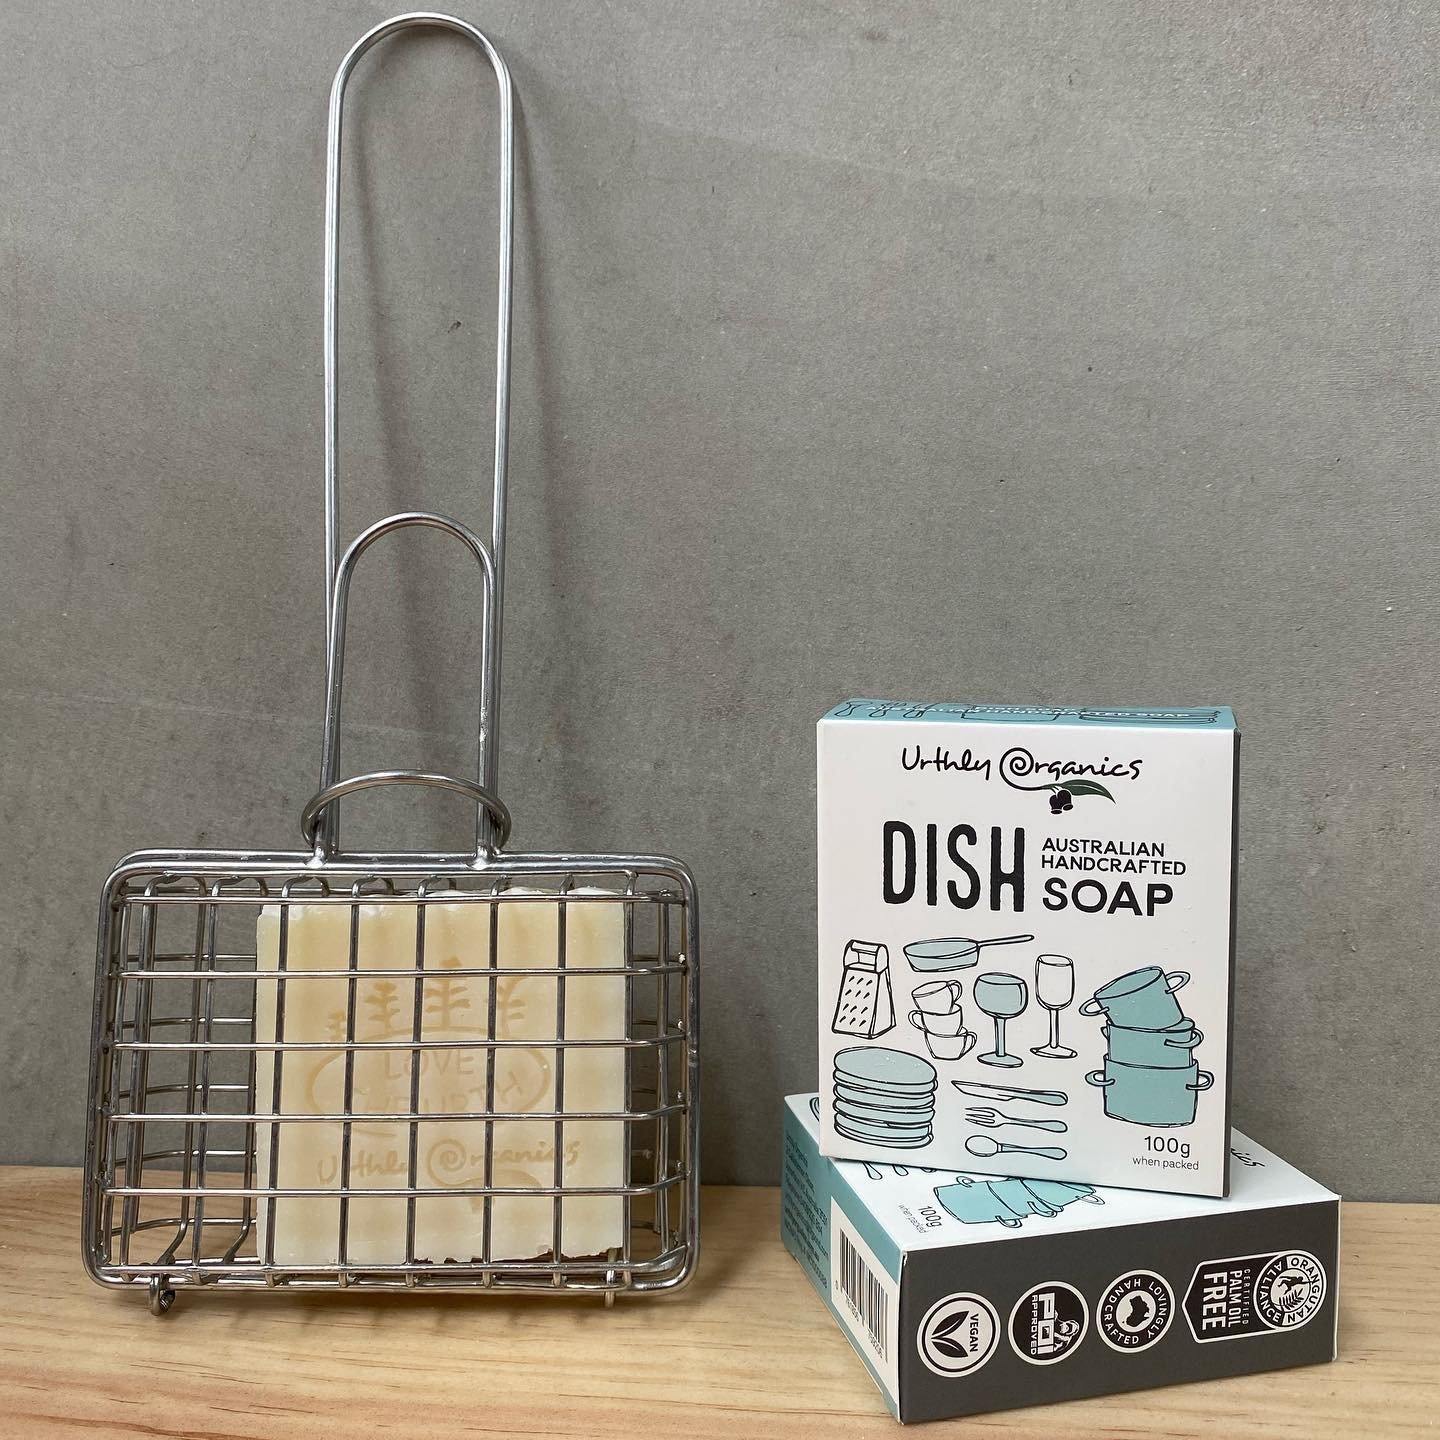 Dish Soap Swisher - UrthlyOrganics Natural ethical skincare and cleaning